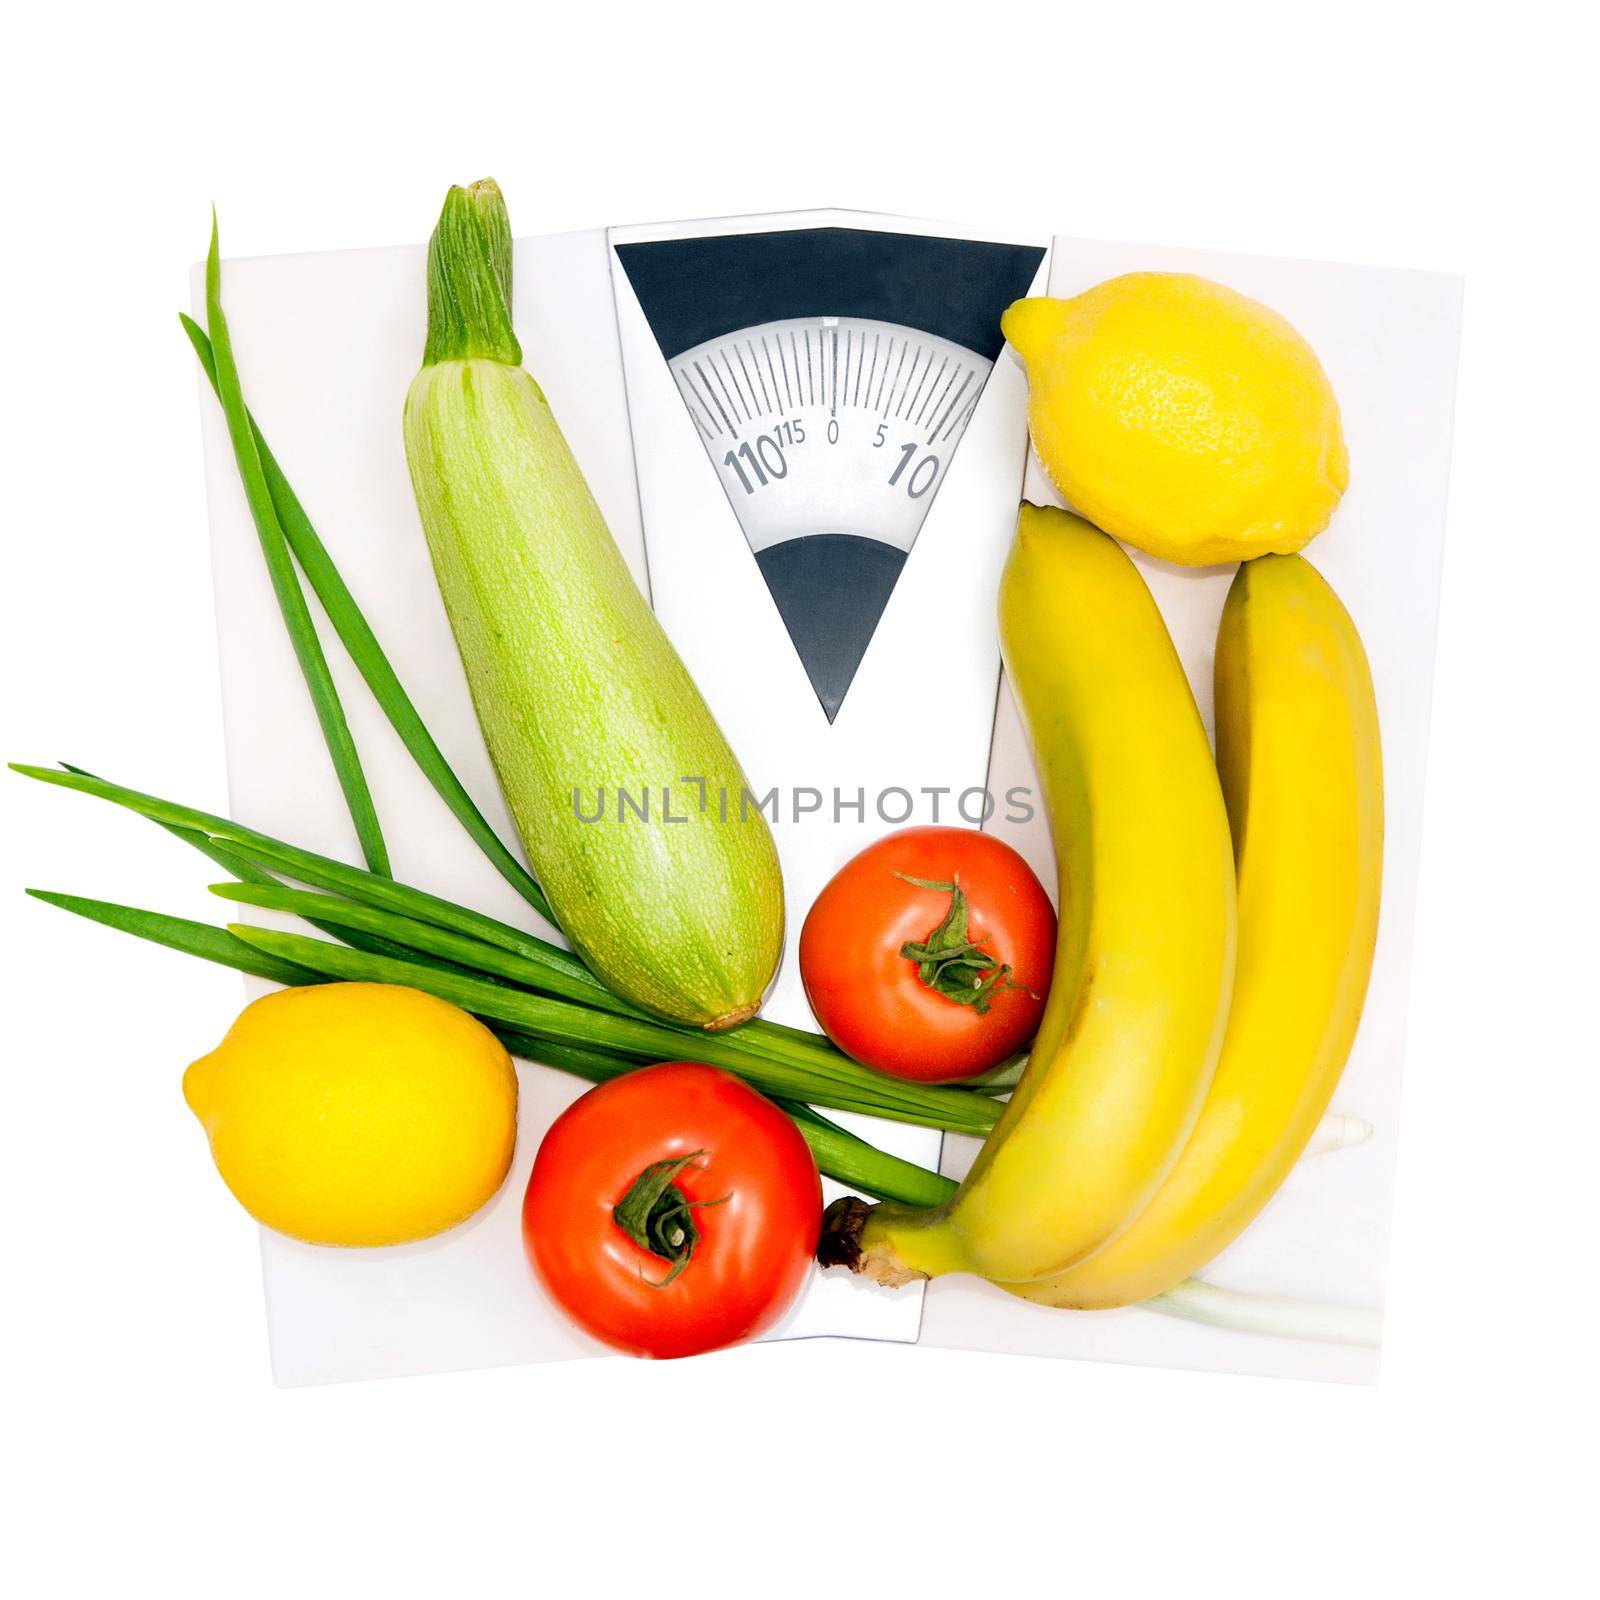 Diet and nutrition. Vegetables and fruits on the scales